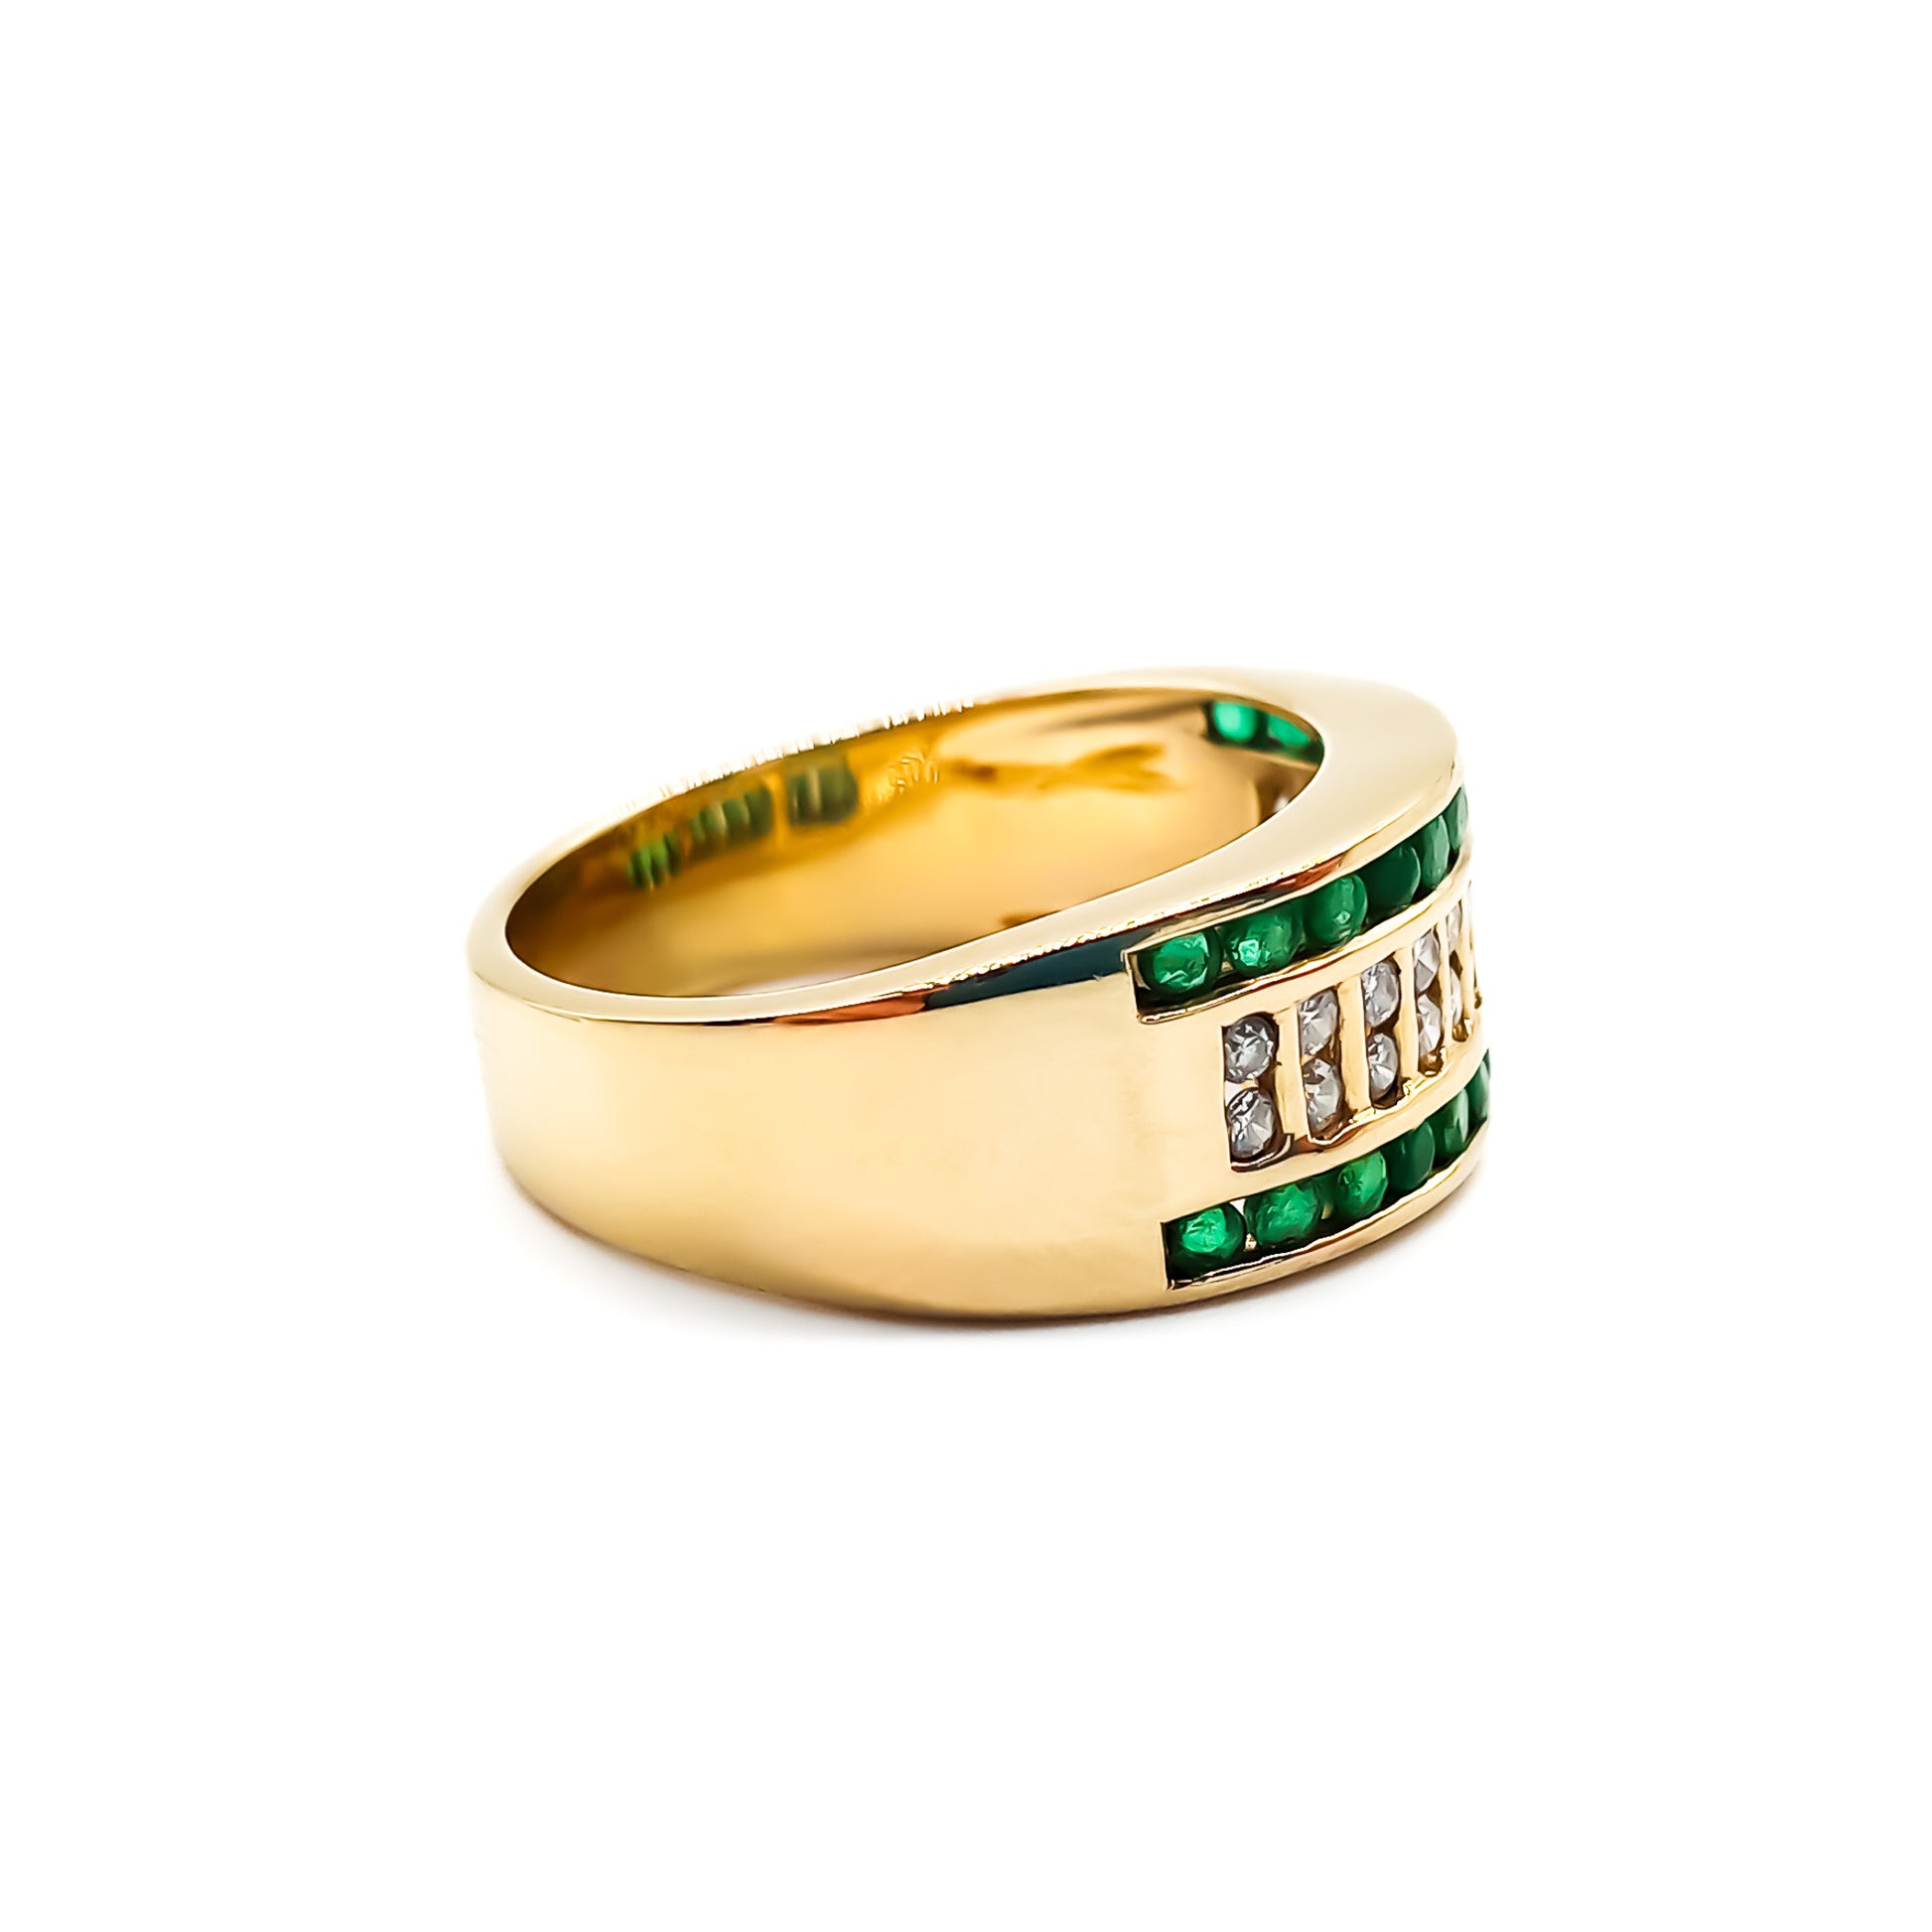 Stunning 14ct yellow gold ring with twenty-four round emeralds and twenty-two small round diamonds in a channel setting.